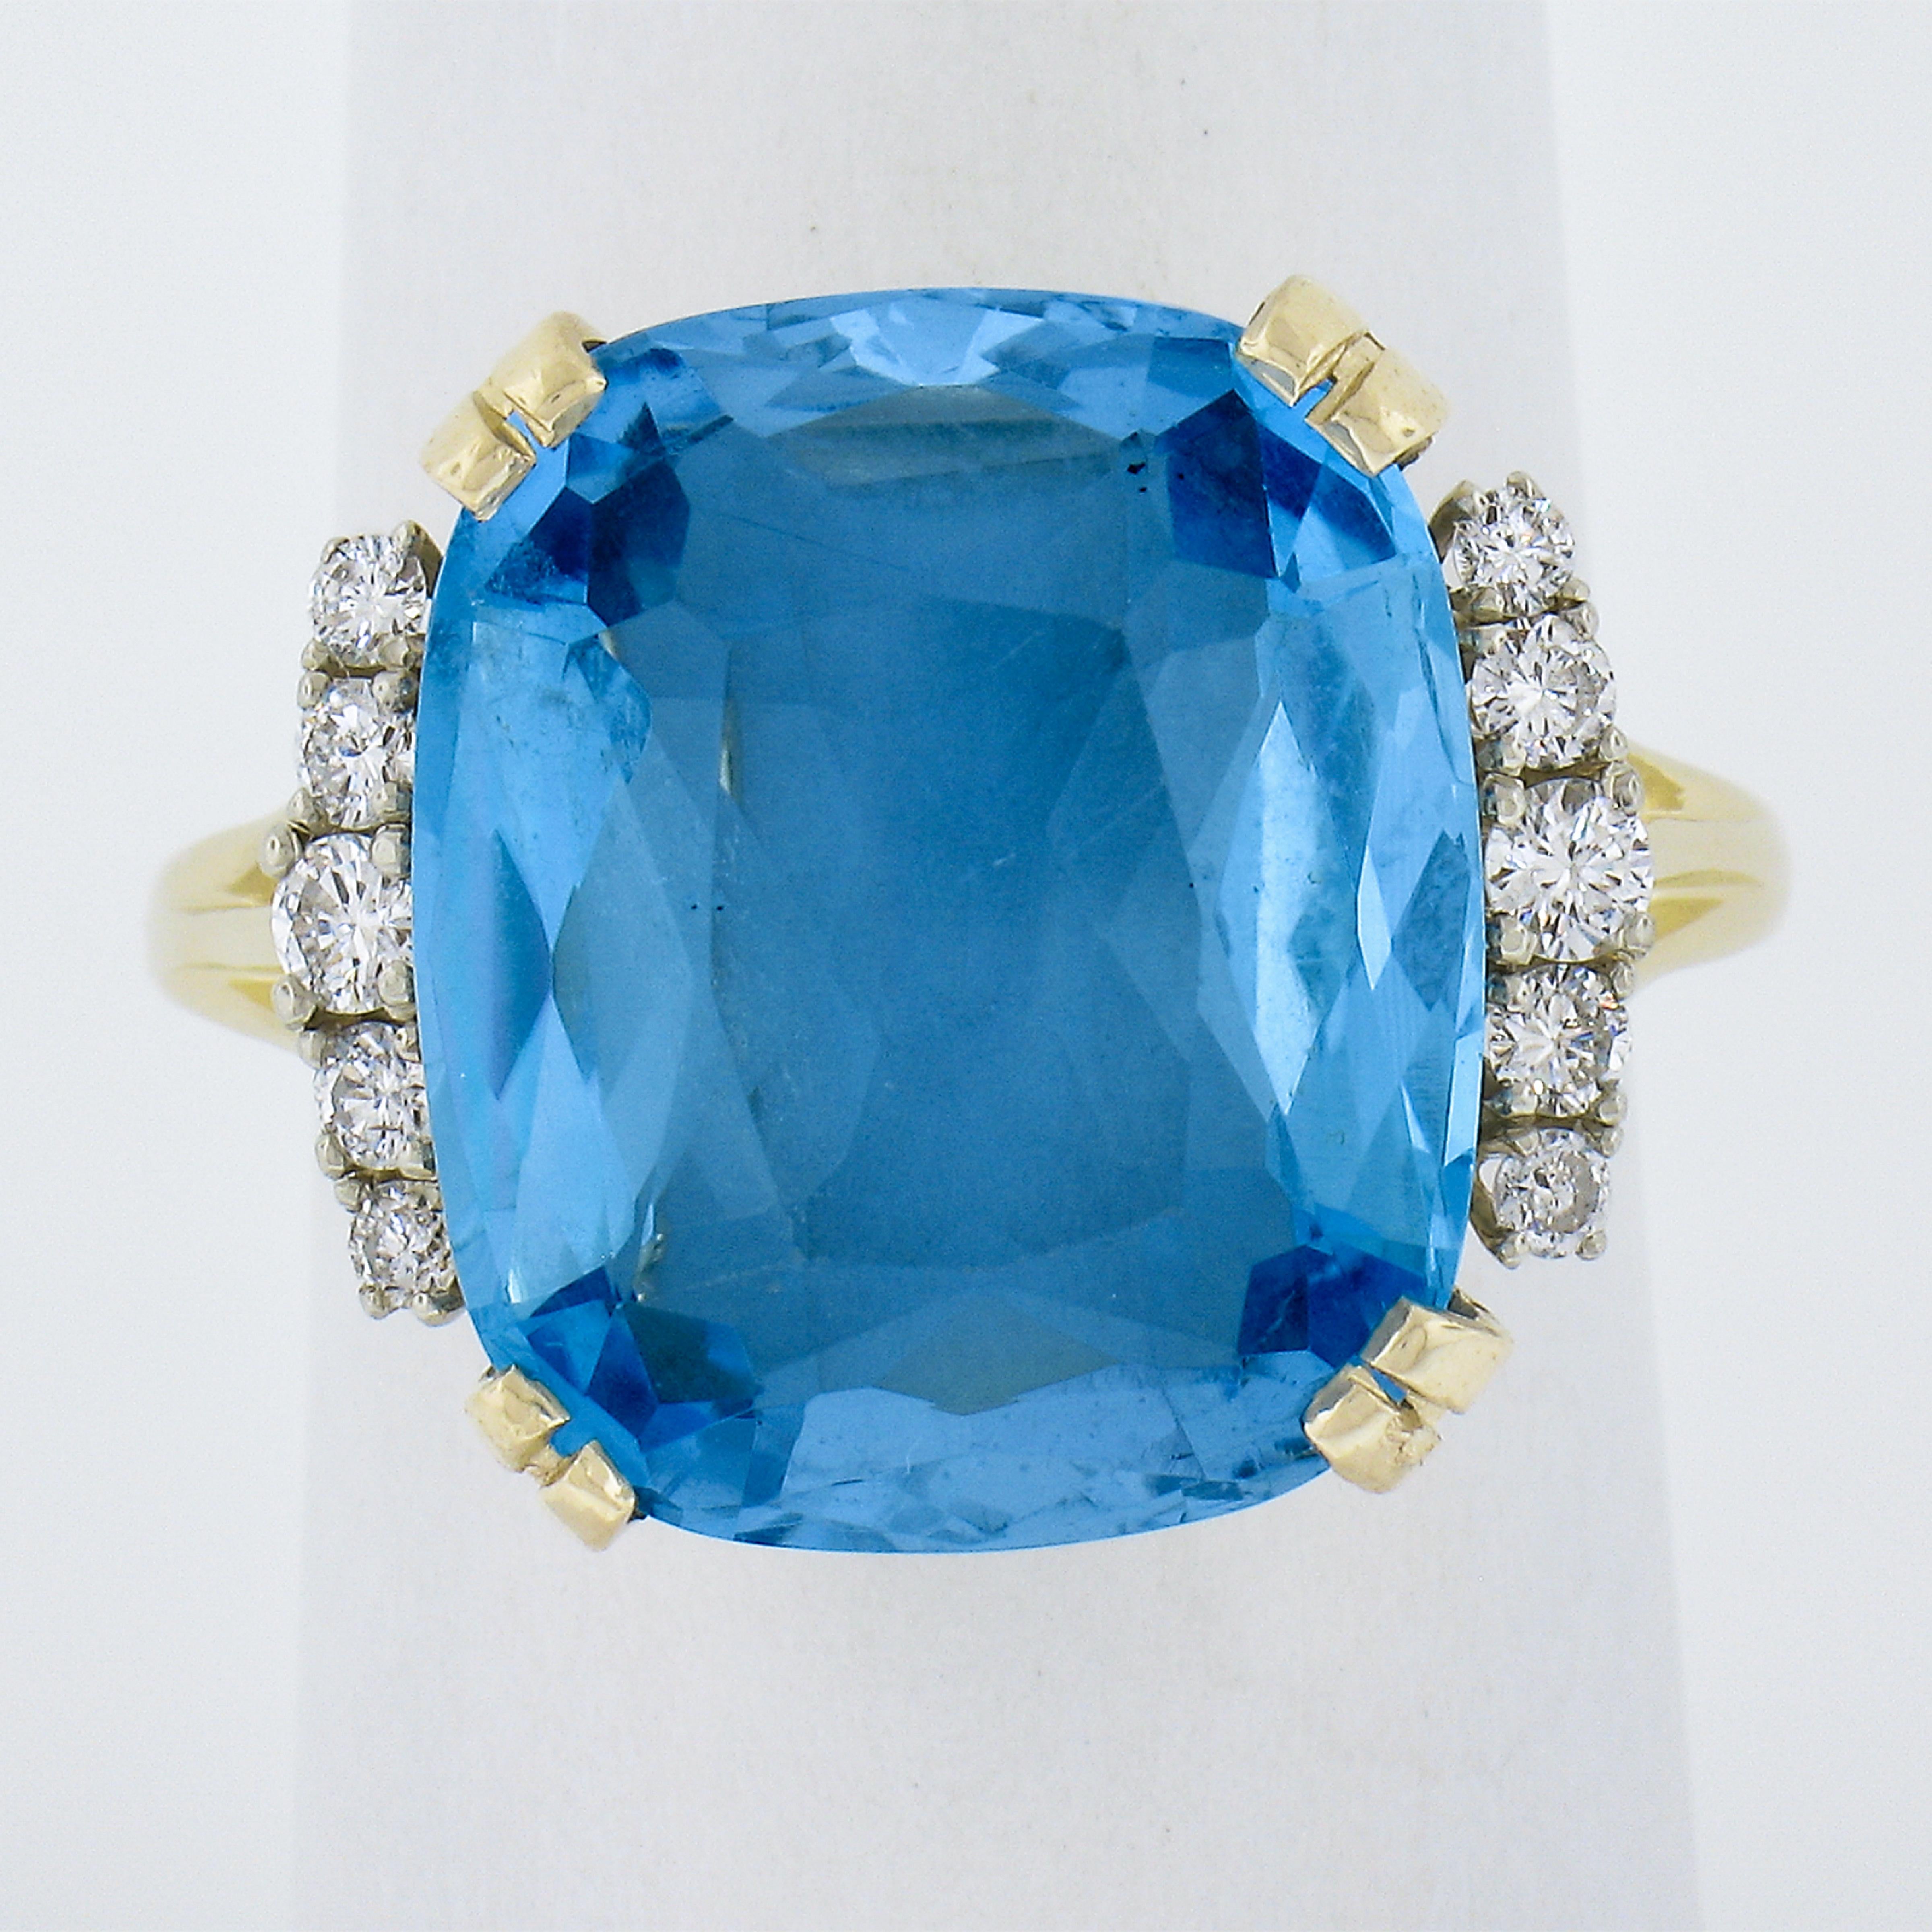 --Stone(s):--
(1) Natural Genuine Aquamarine - Cushion Cut - Prong Set - Rich Blue Color - 9.20ct (approx. based on the certification)
*See Certification Information Below*
(10) Natural Genuine Diamonds - Round Brilliant Cut - Prong Set - F/G Color